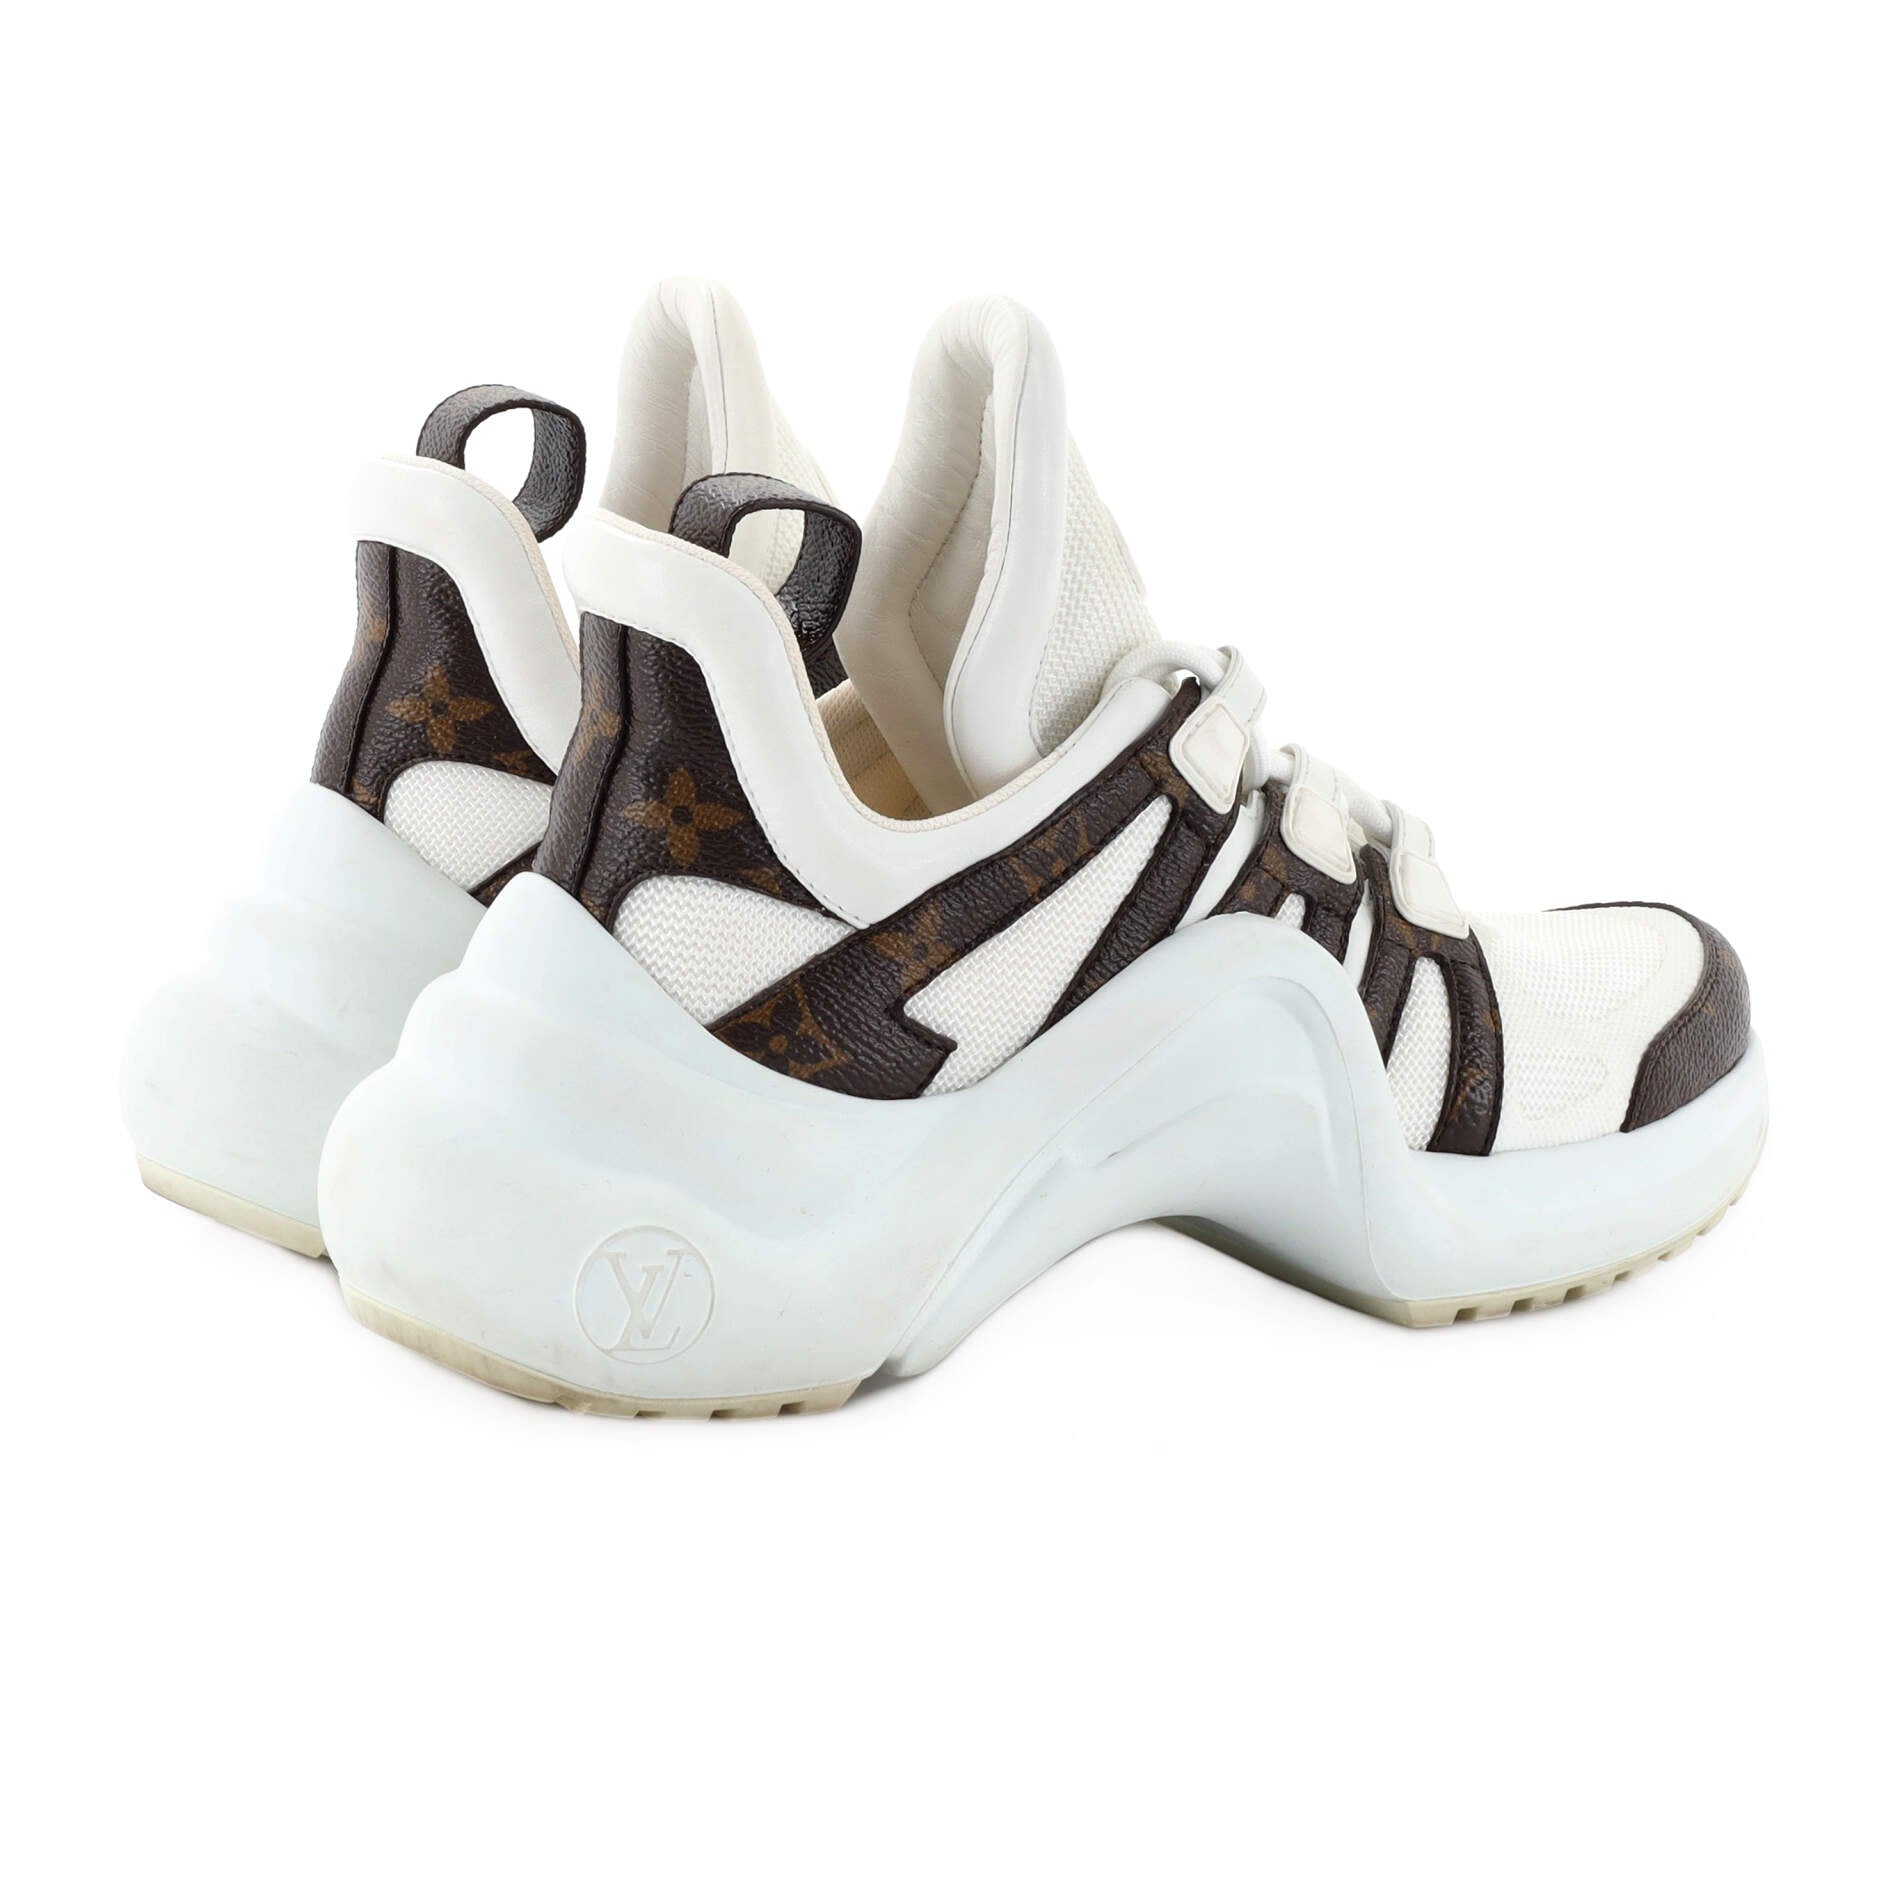 Louis Vuitton Pattern Print Archlight Chunky Sneakers